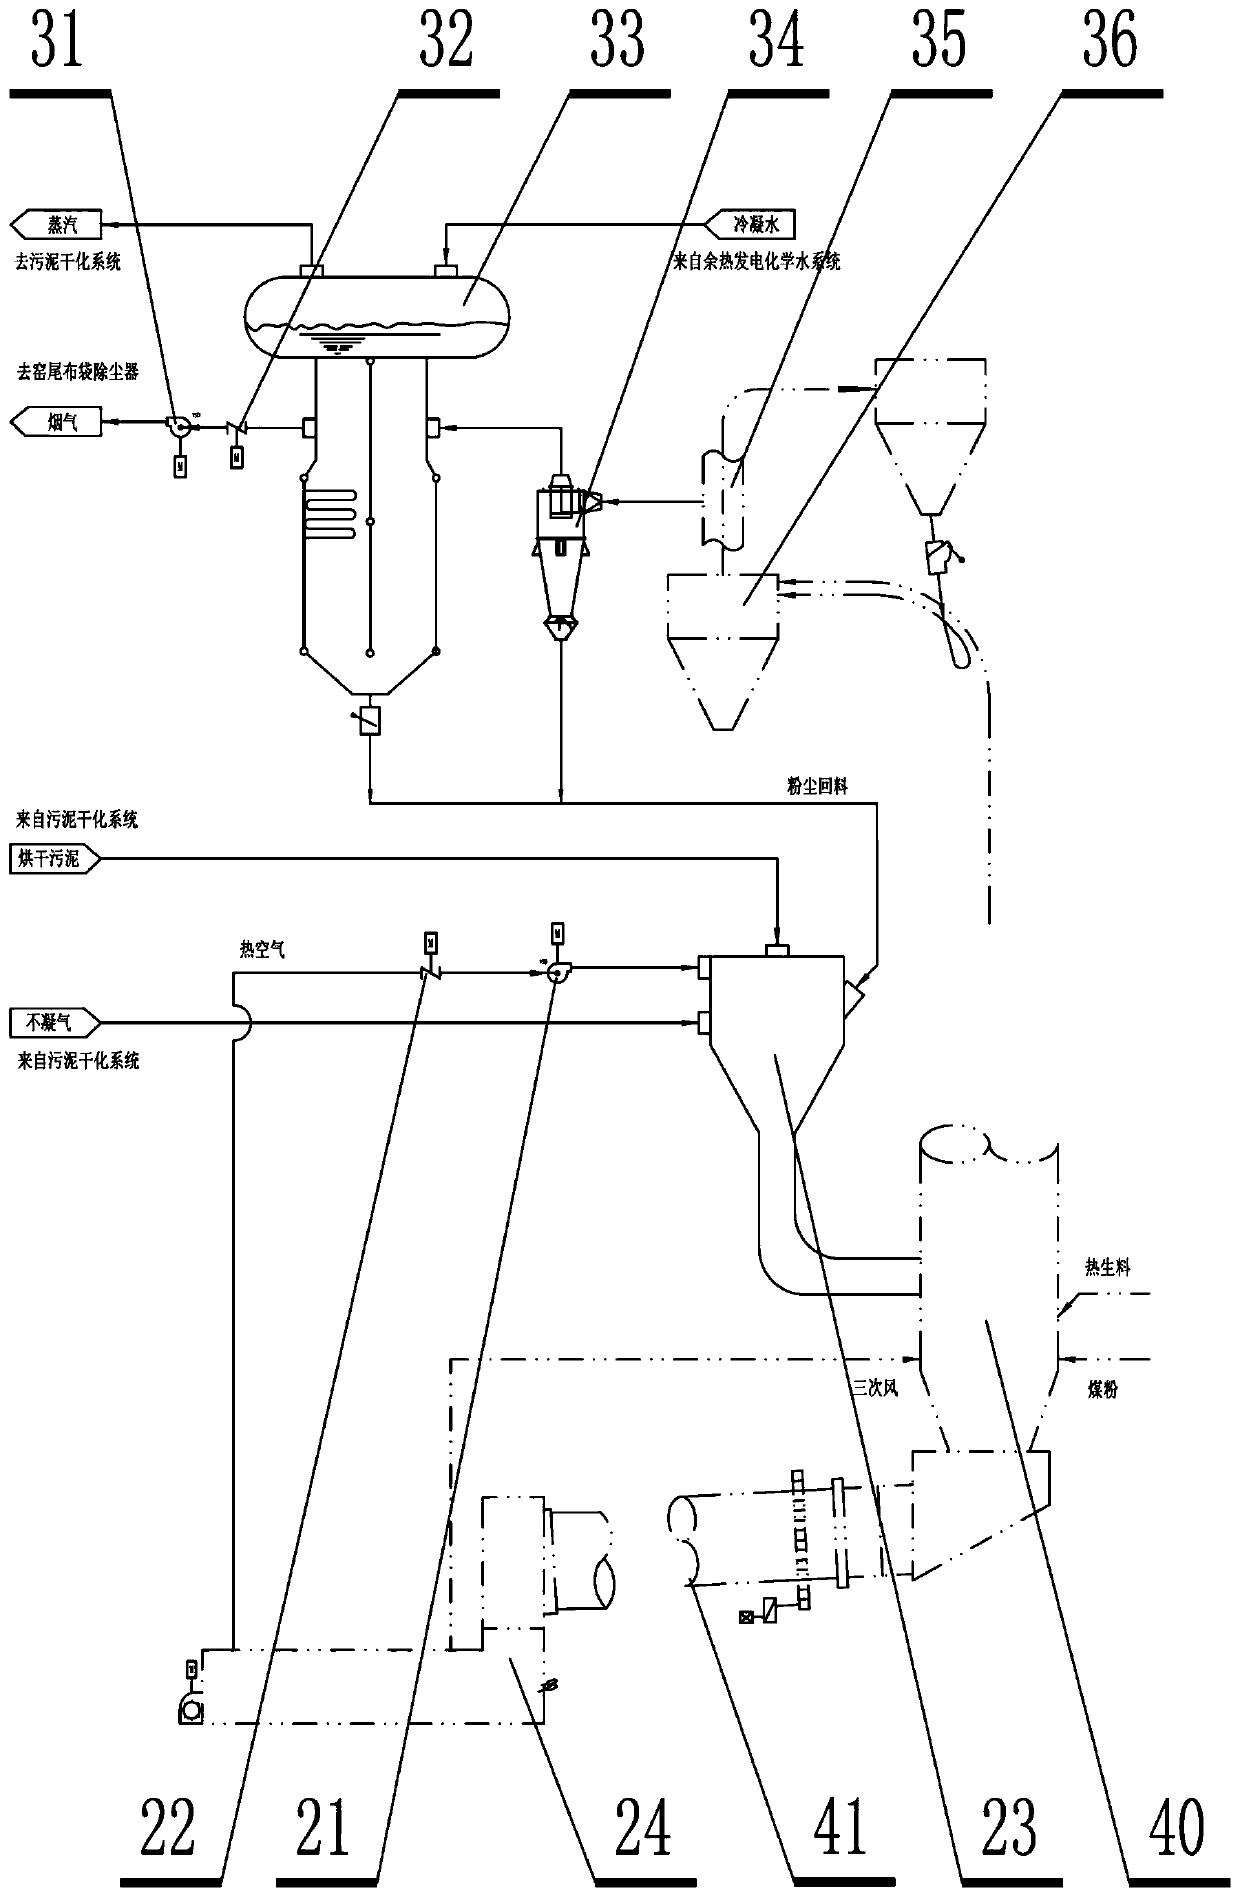 Treatment process and treatment system for municipal sludge